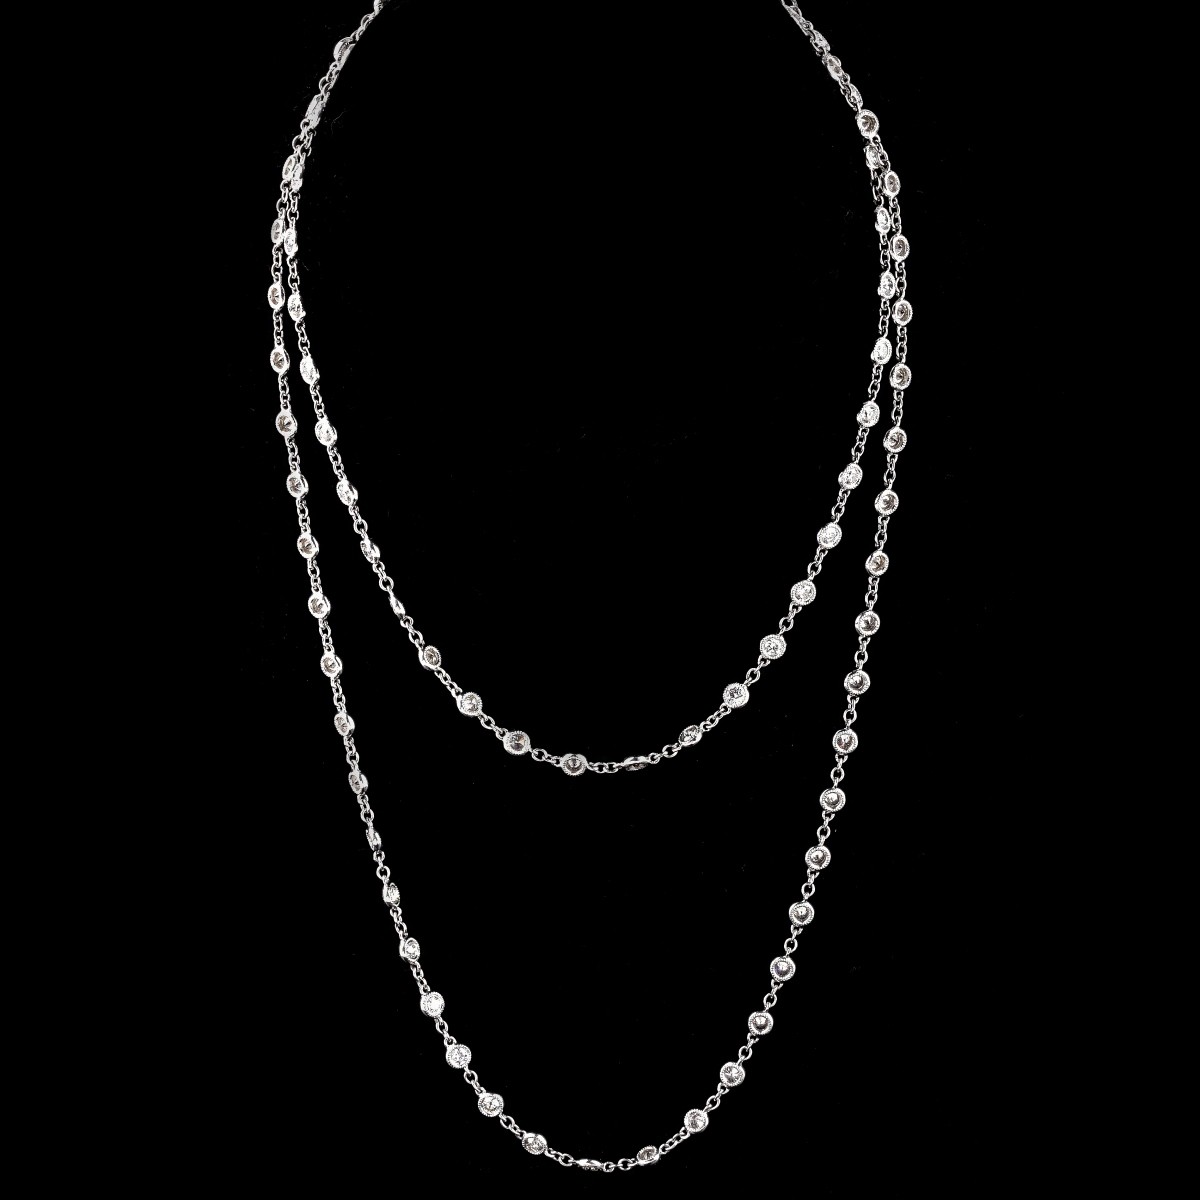 Tiffany style Diamond and 18K Gold Necklace | Kodner Auctions